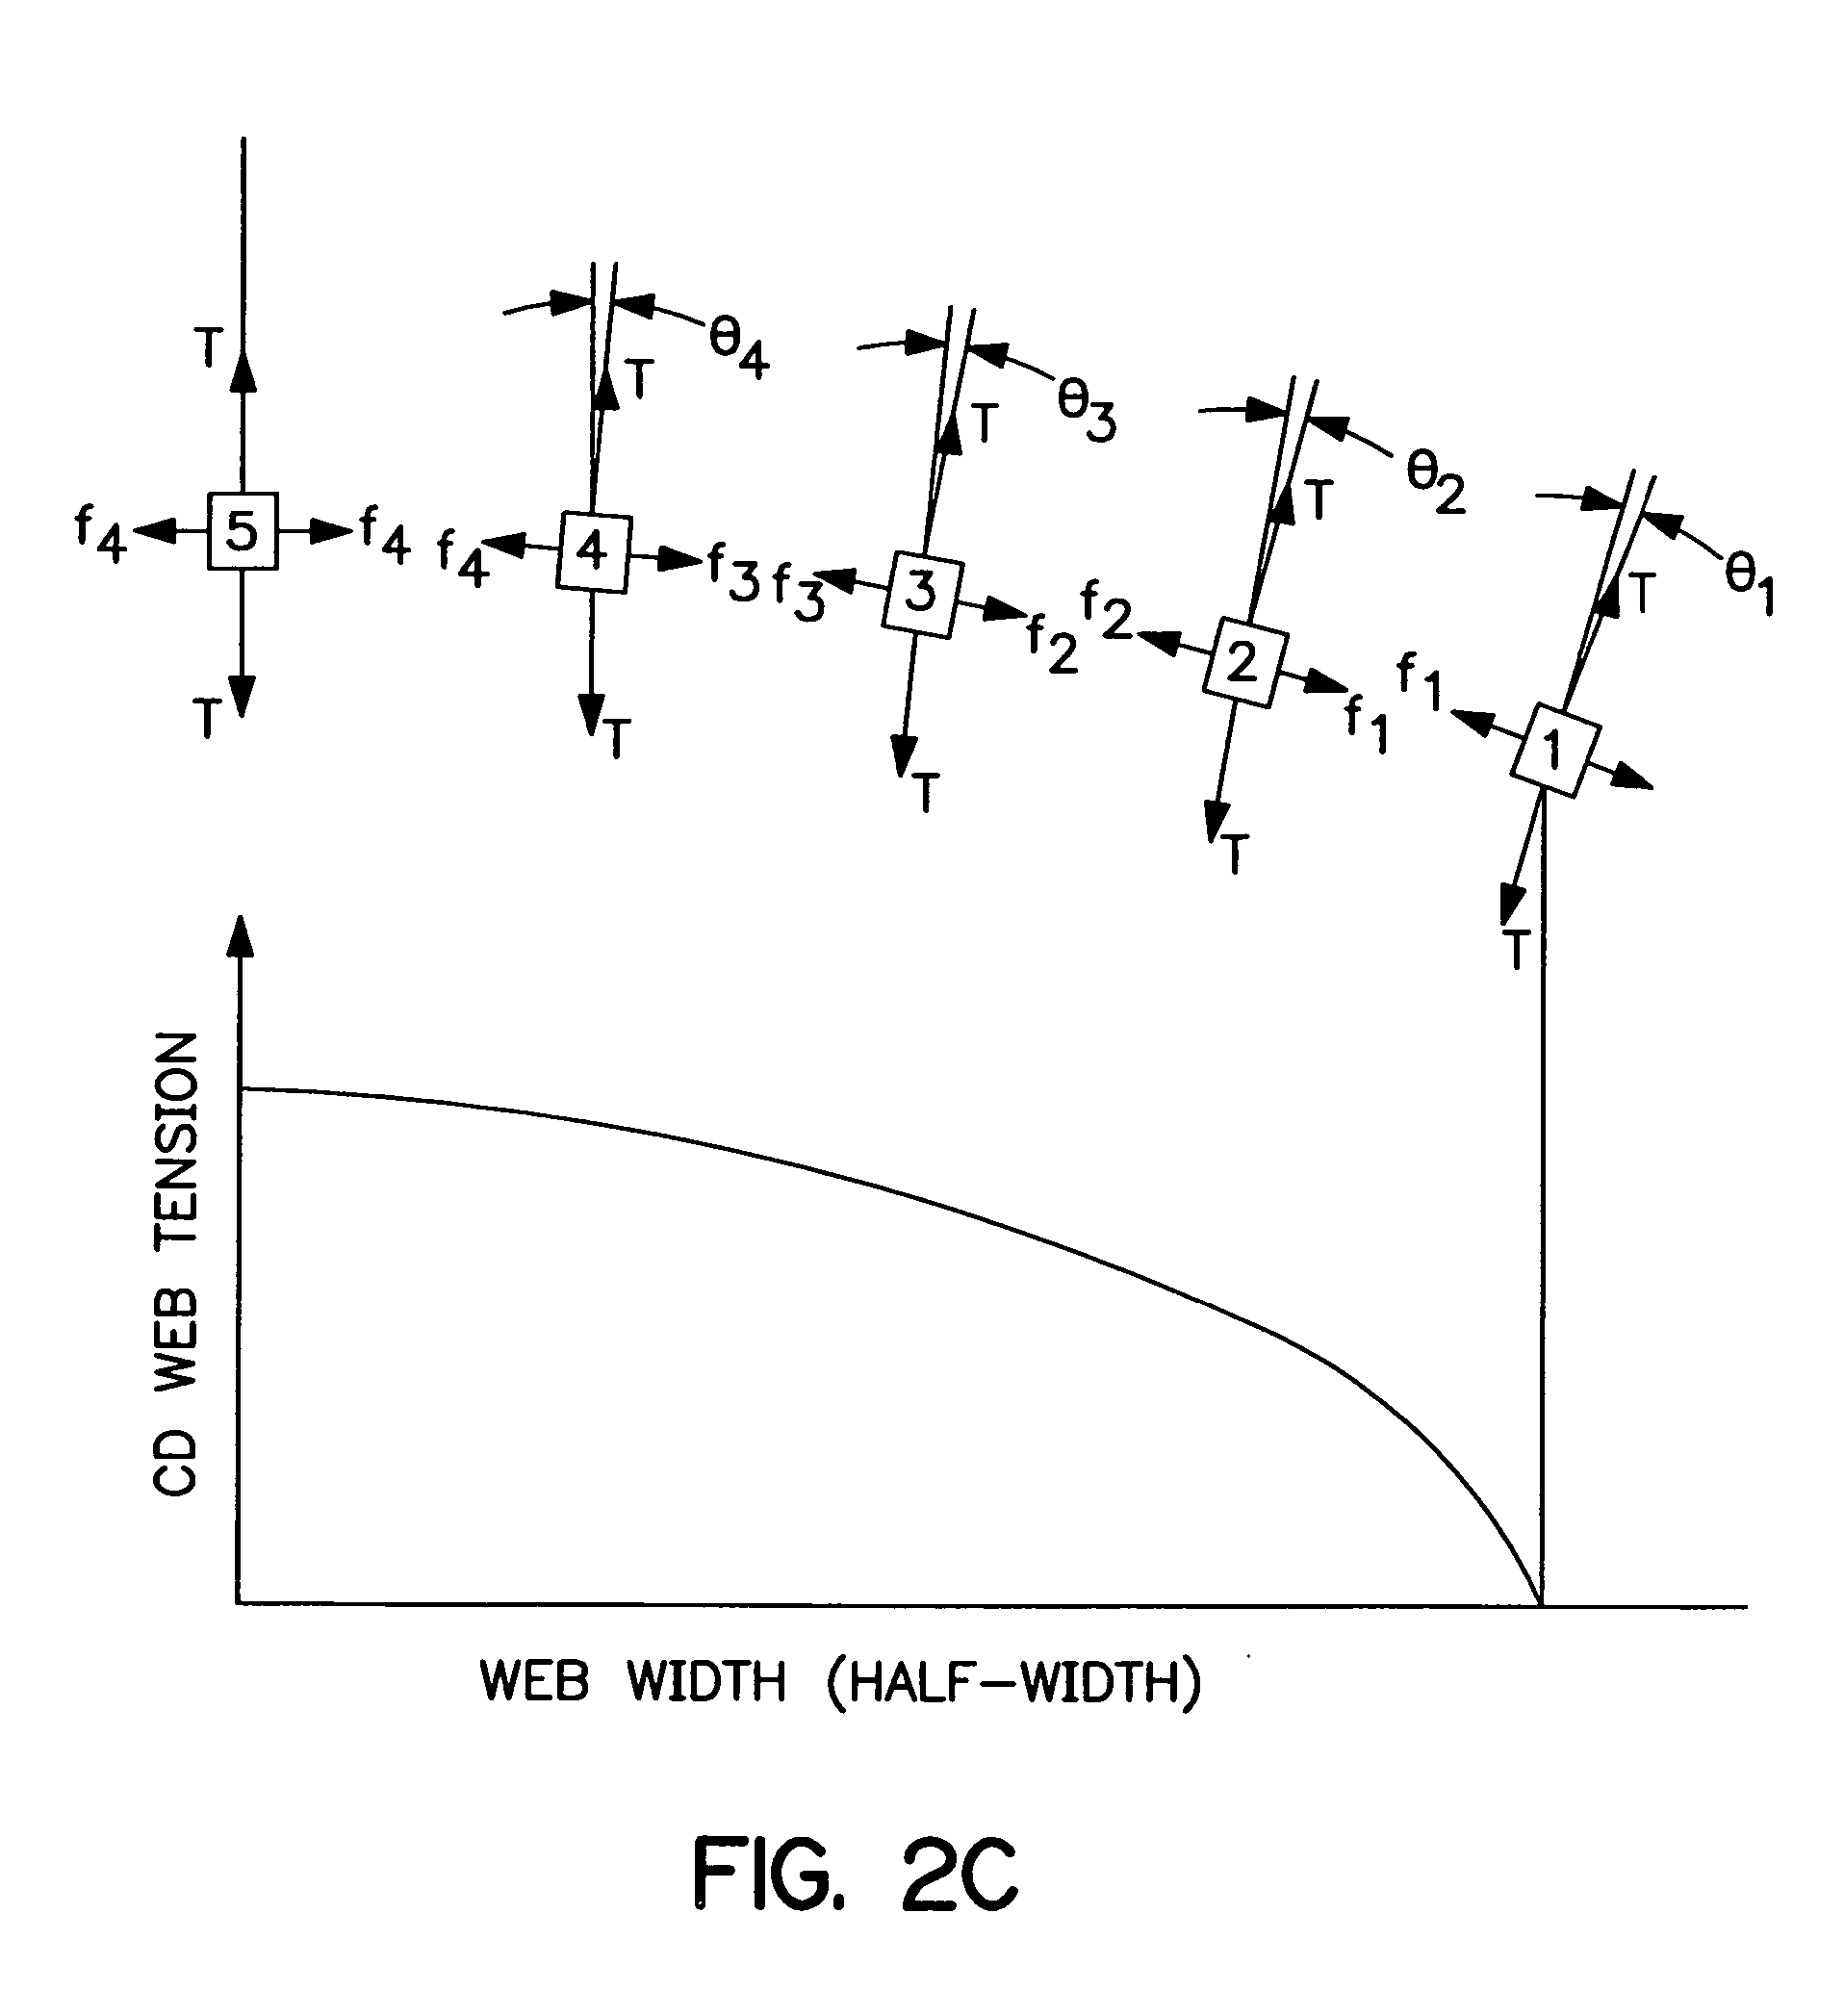 Process for making necked nonwoven webs having improved cross-directional uniformity